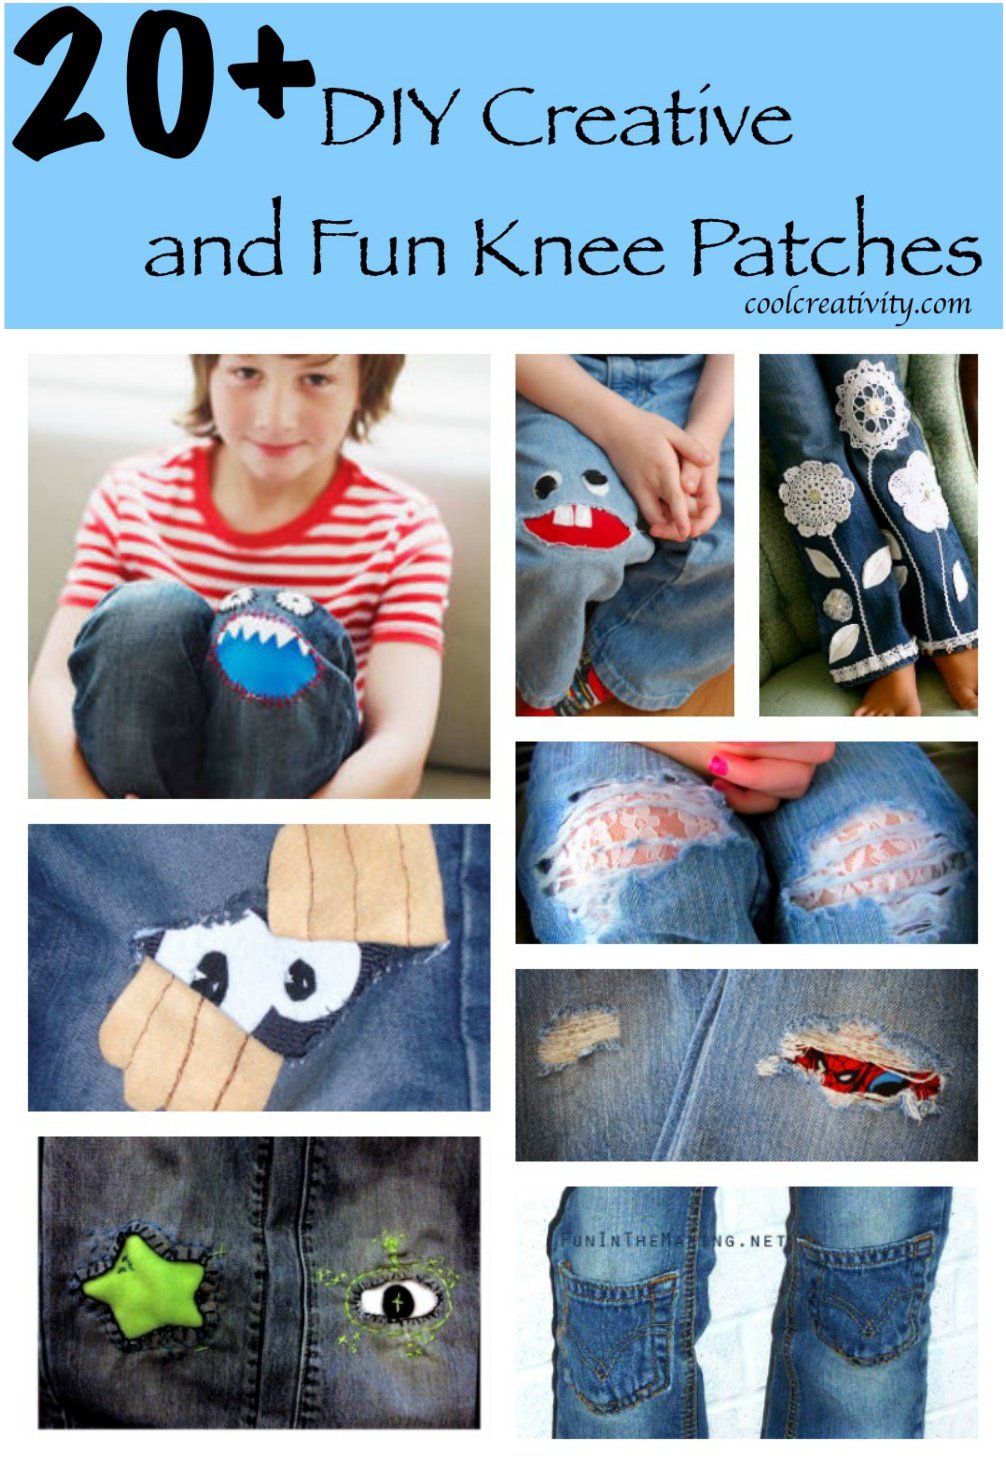 20+ DIY Creative and Fun Knee Patches